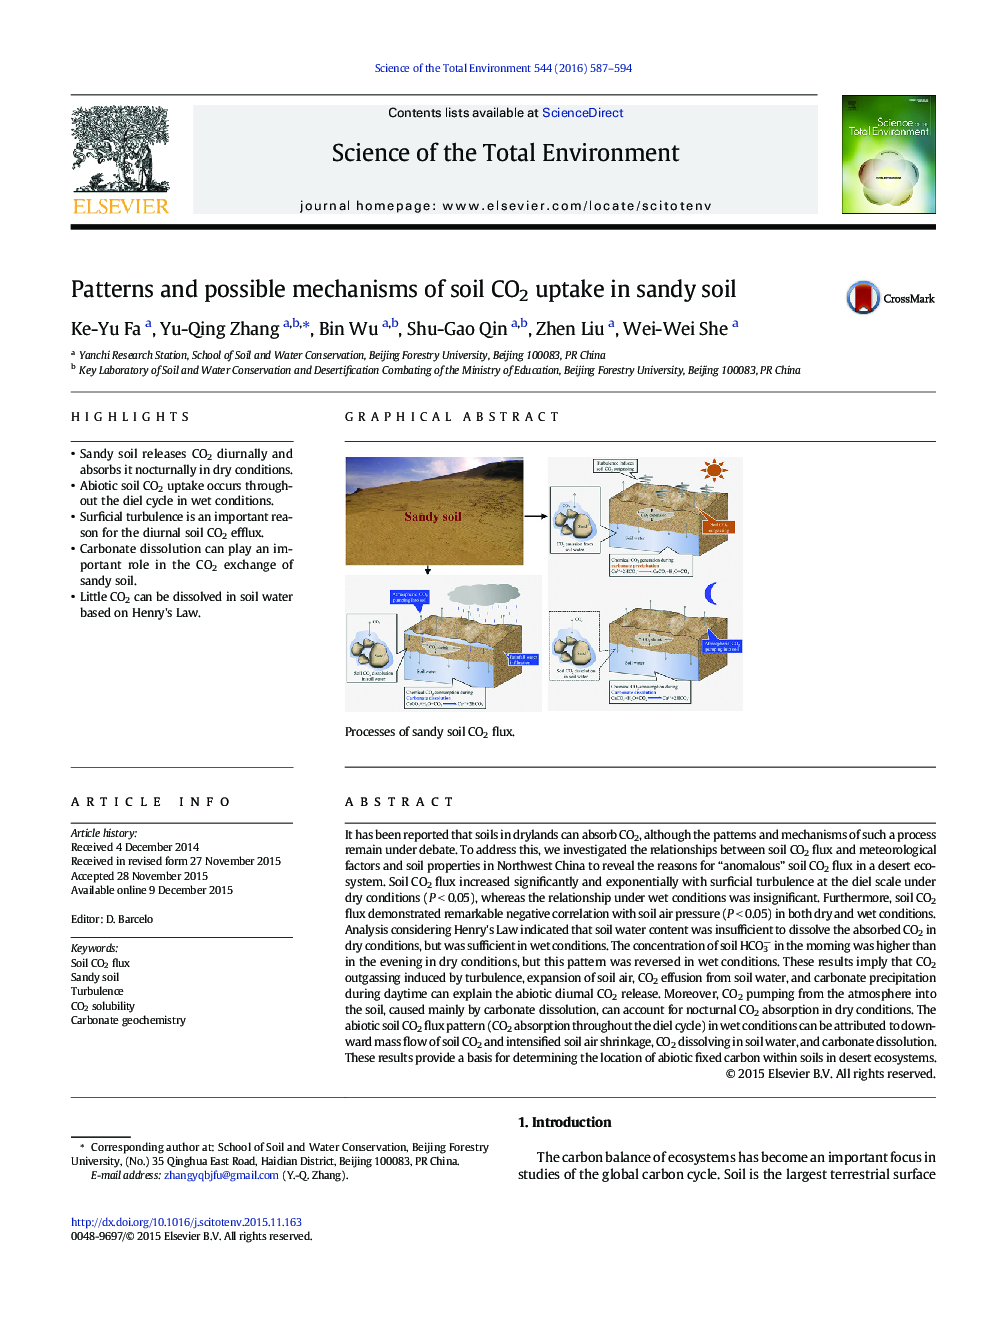 Patterns and possible mechanisms of soil CO2 uptake in sandy soil